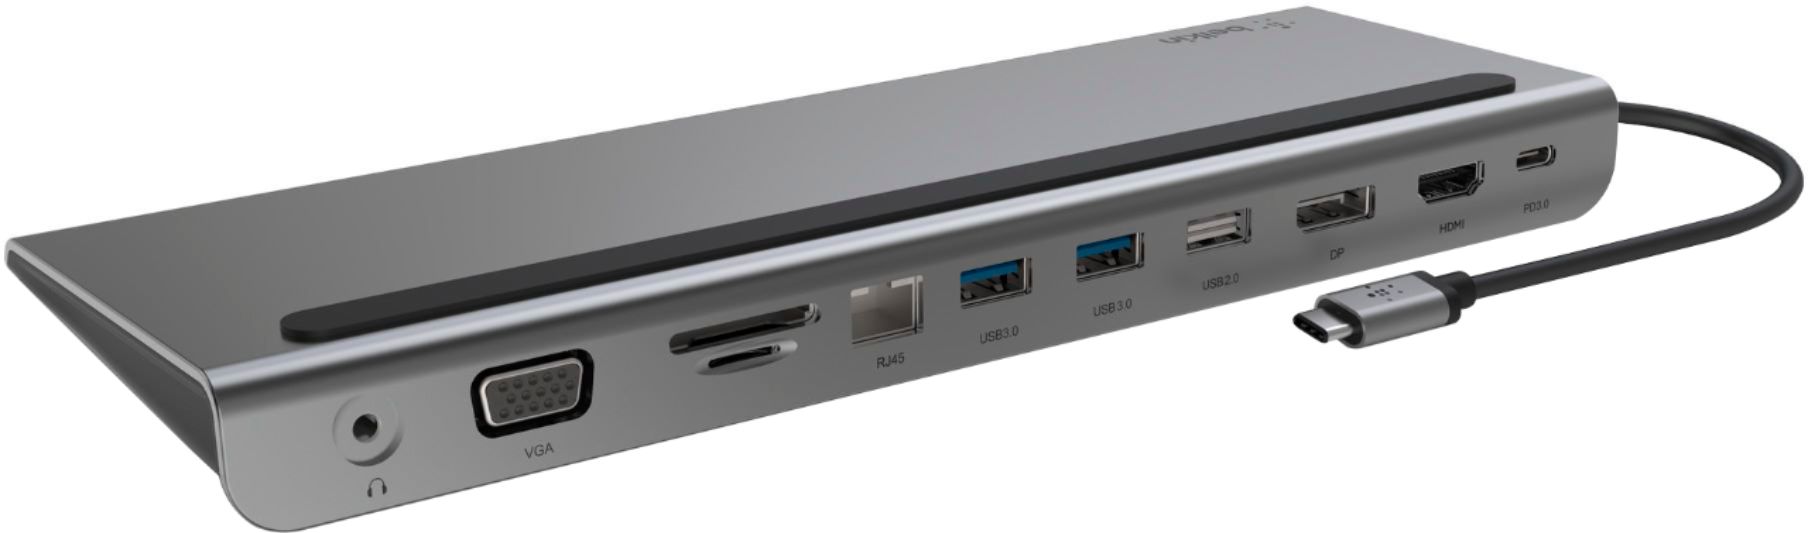 Belkin 11-in-1 USB C Hub with 4K HDMI, DP, VGA, 100W PD Station for MacBook Pro, Air, and more Gray INC004btSGY - Best Buy